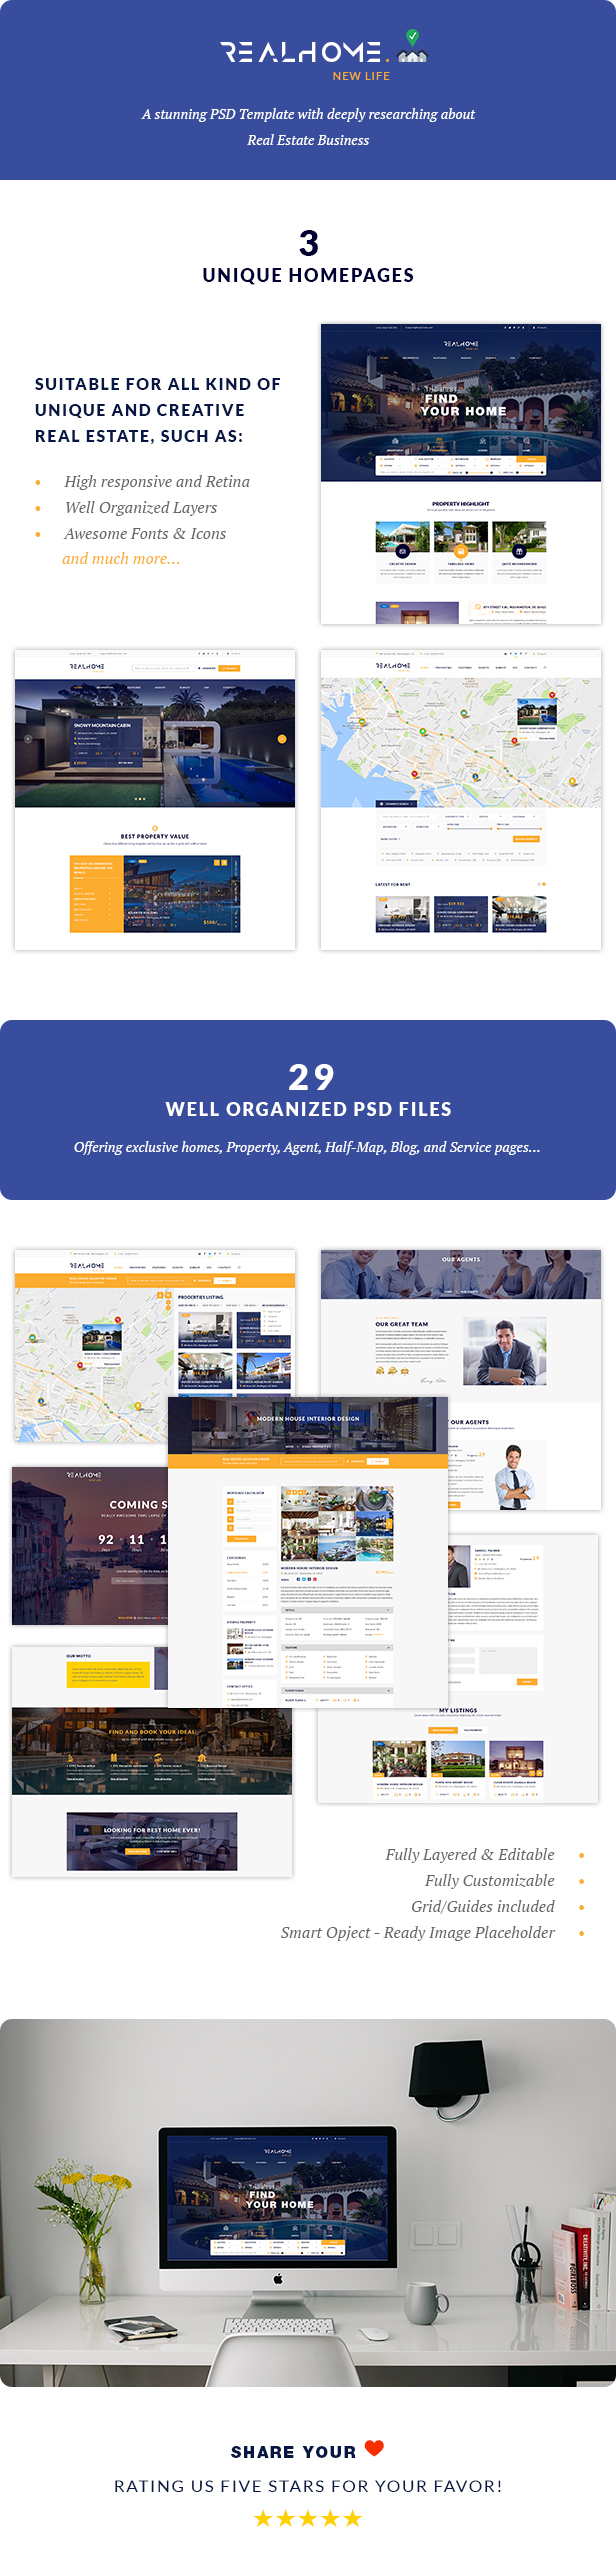 RealHome - Versatile Real Estate PSD Template - 1